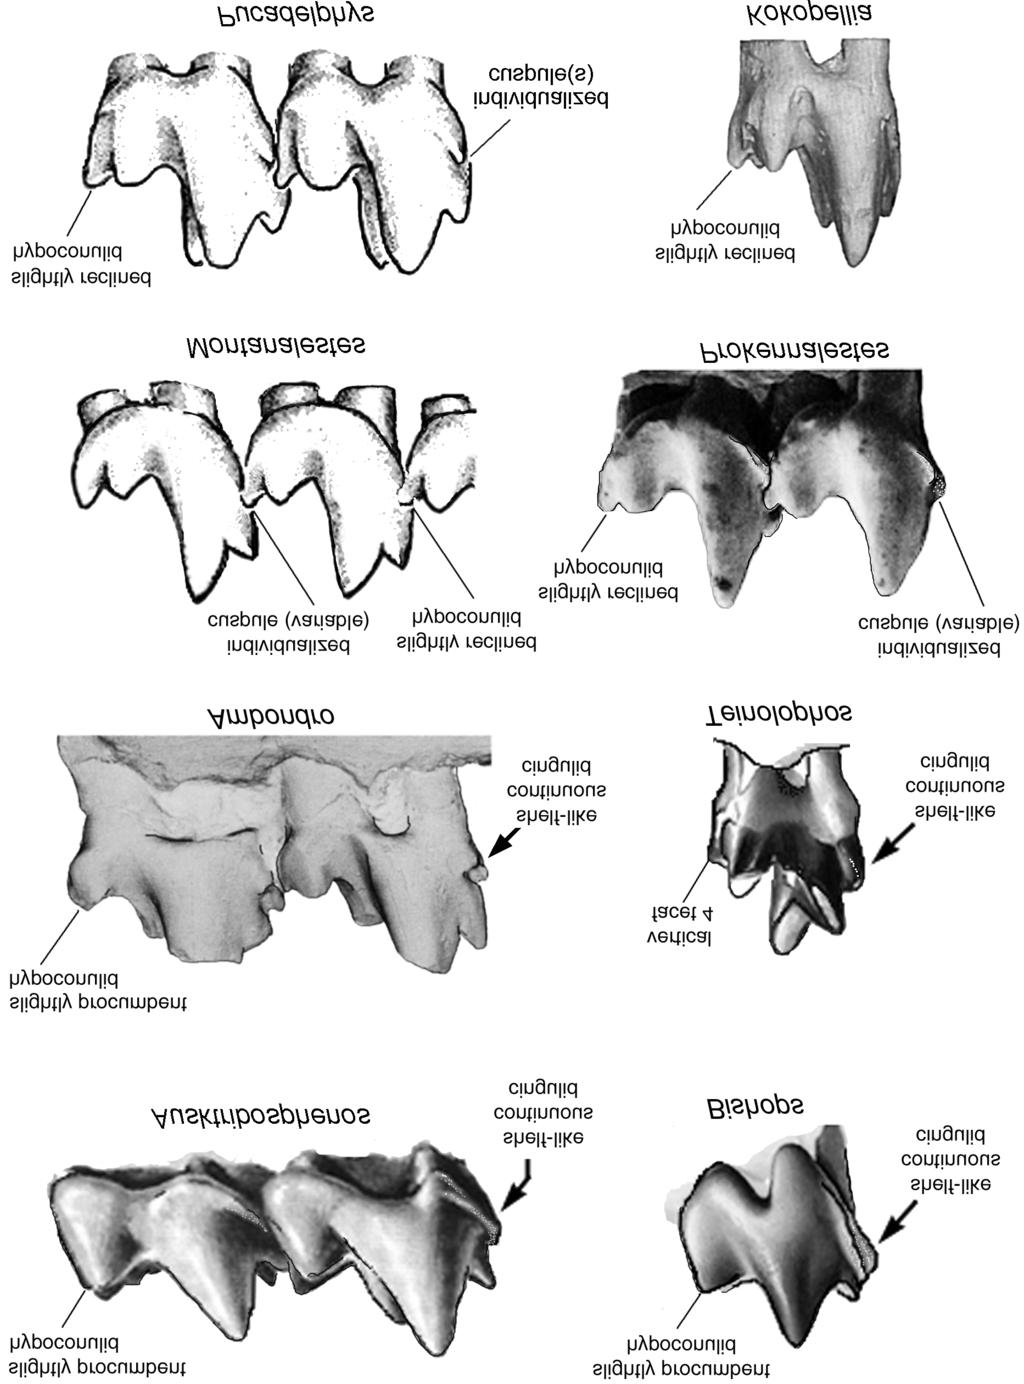 LUO ET AL. PHYLOGENY OF MESOZOIC MAMMALS A B C E G 23 D F H garded herein as the hypoconulid).